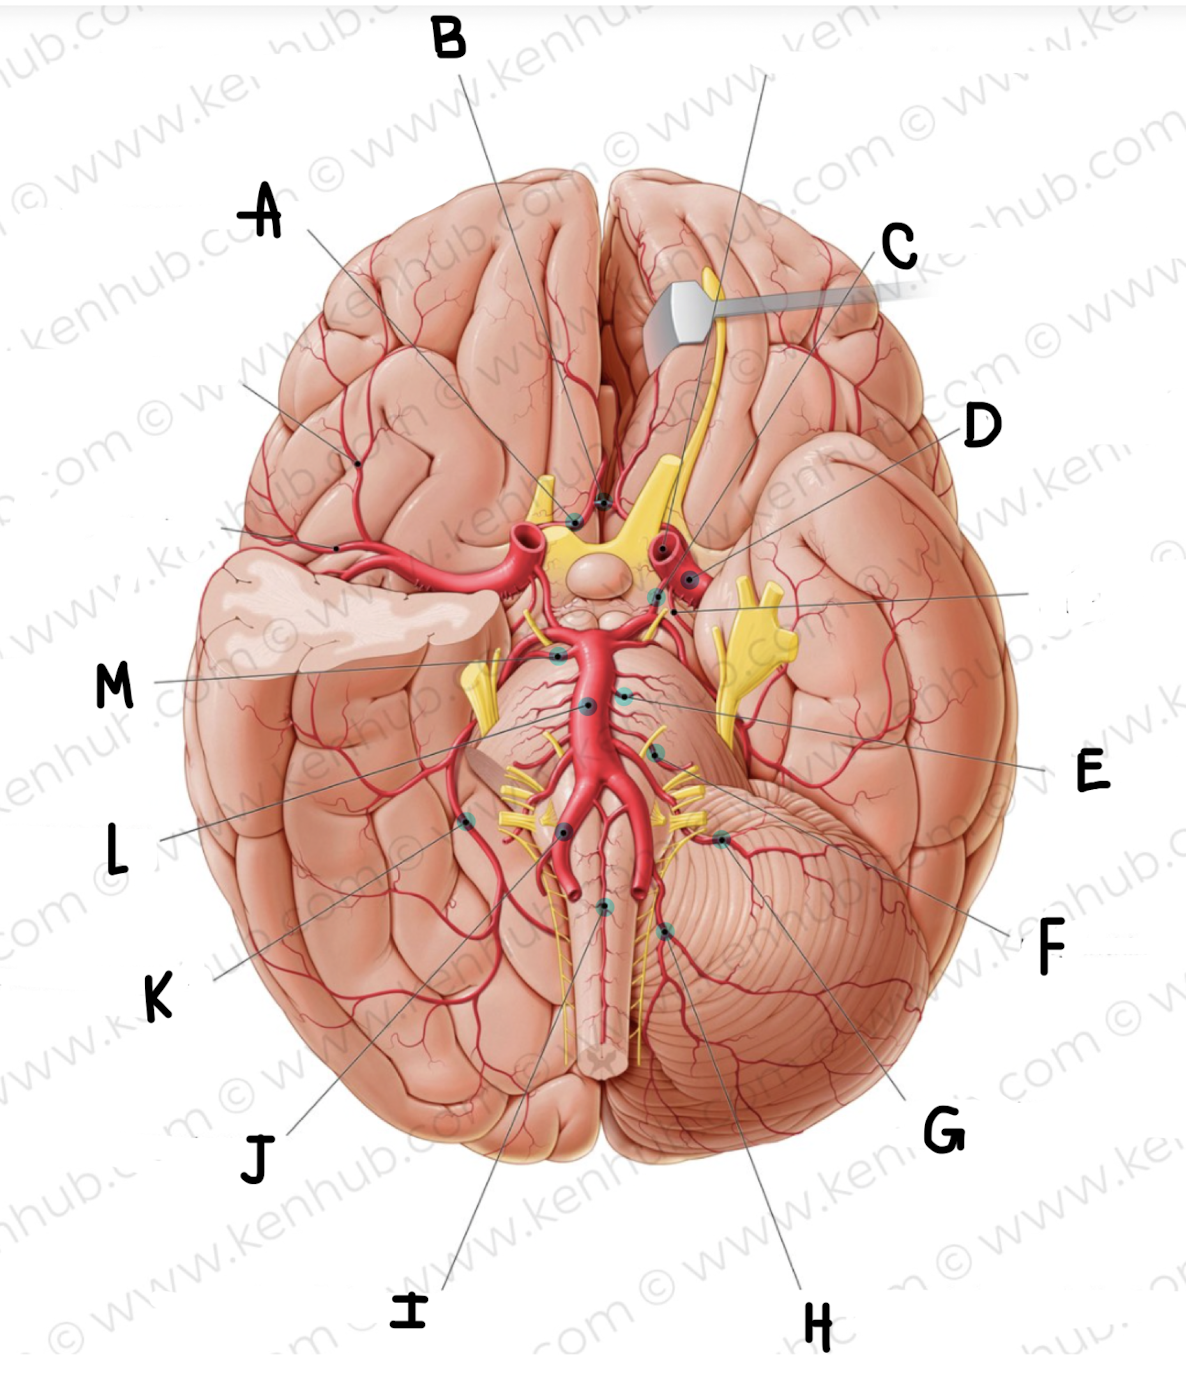 <p>What is the name of the artery labeled A?</p>